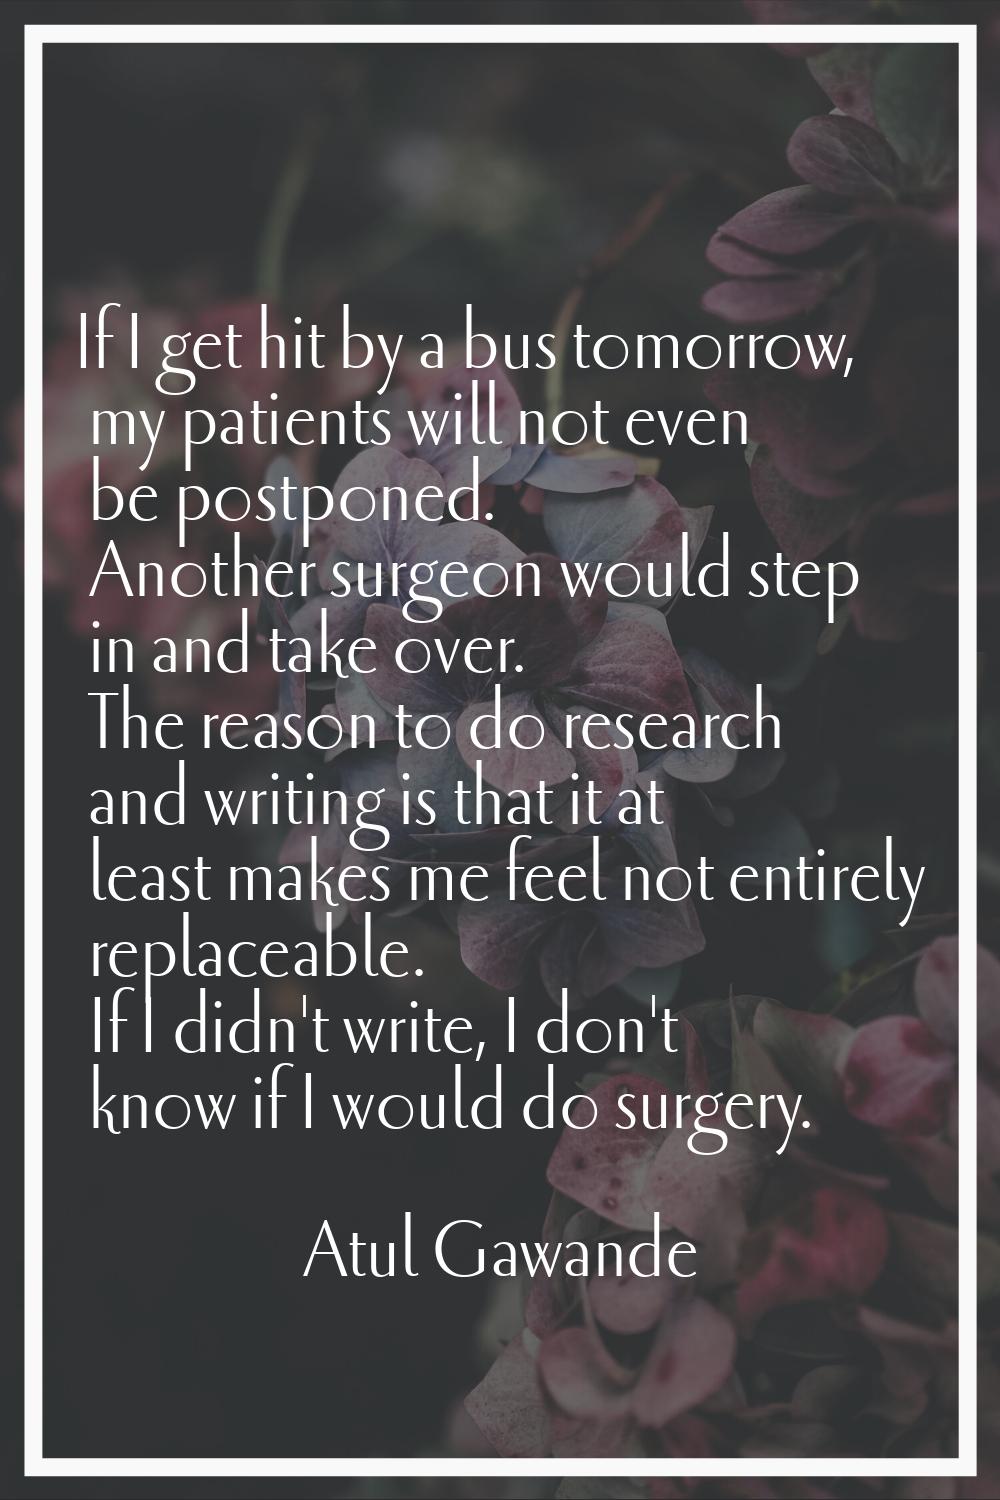 If I get hit by a bus tomorrow, my patients will not even be postponed. Another surgeon would step 